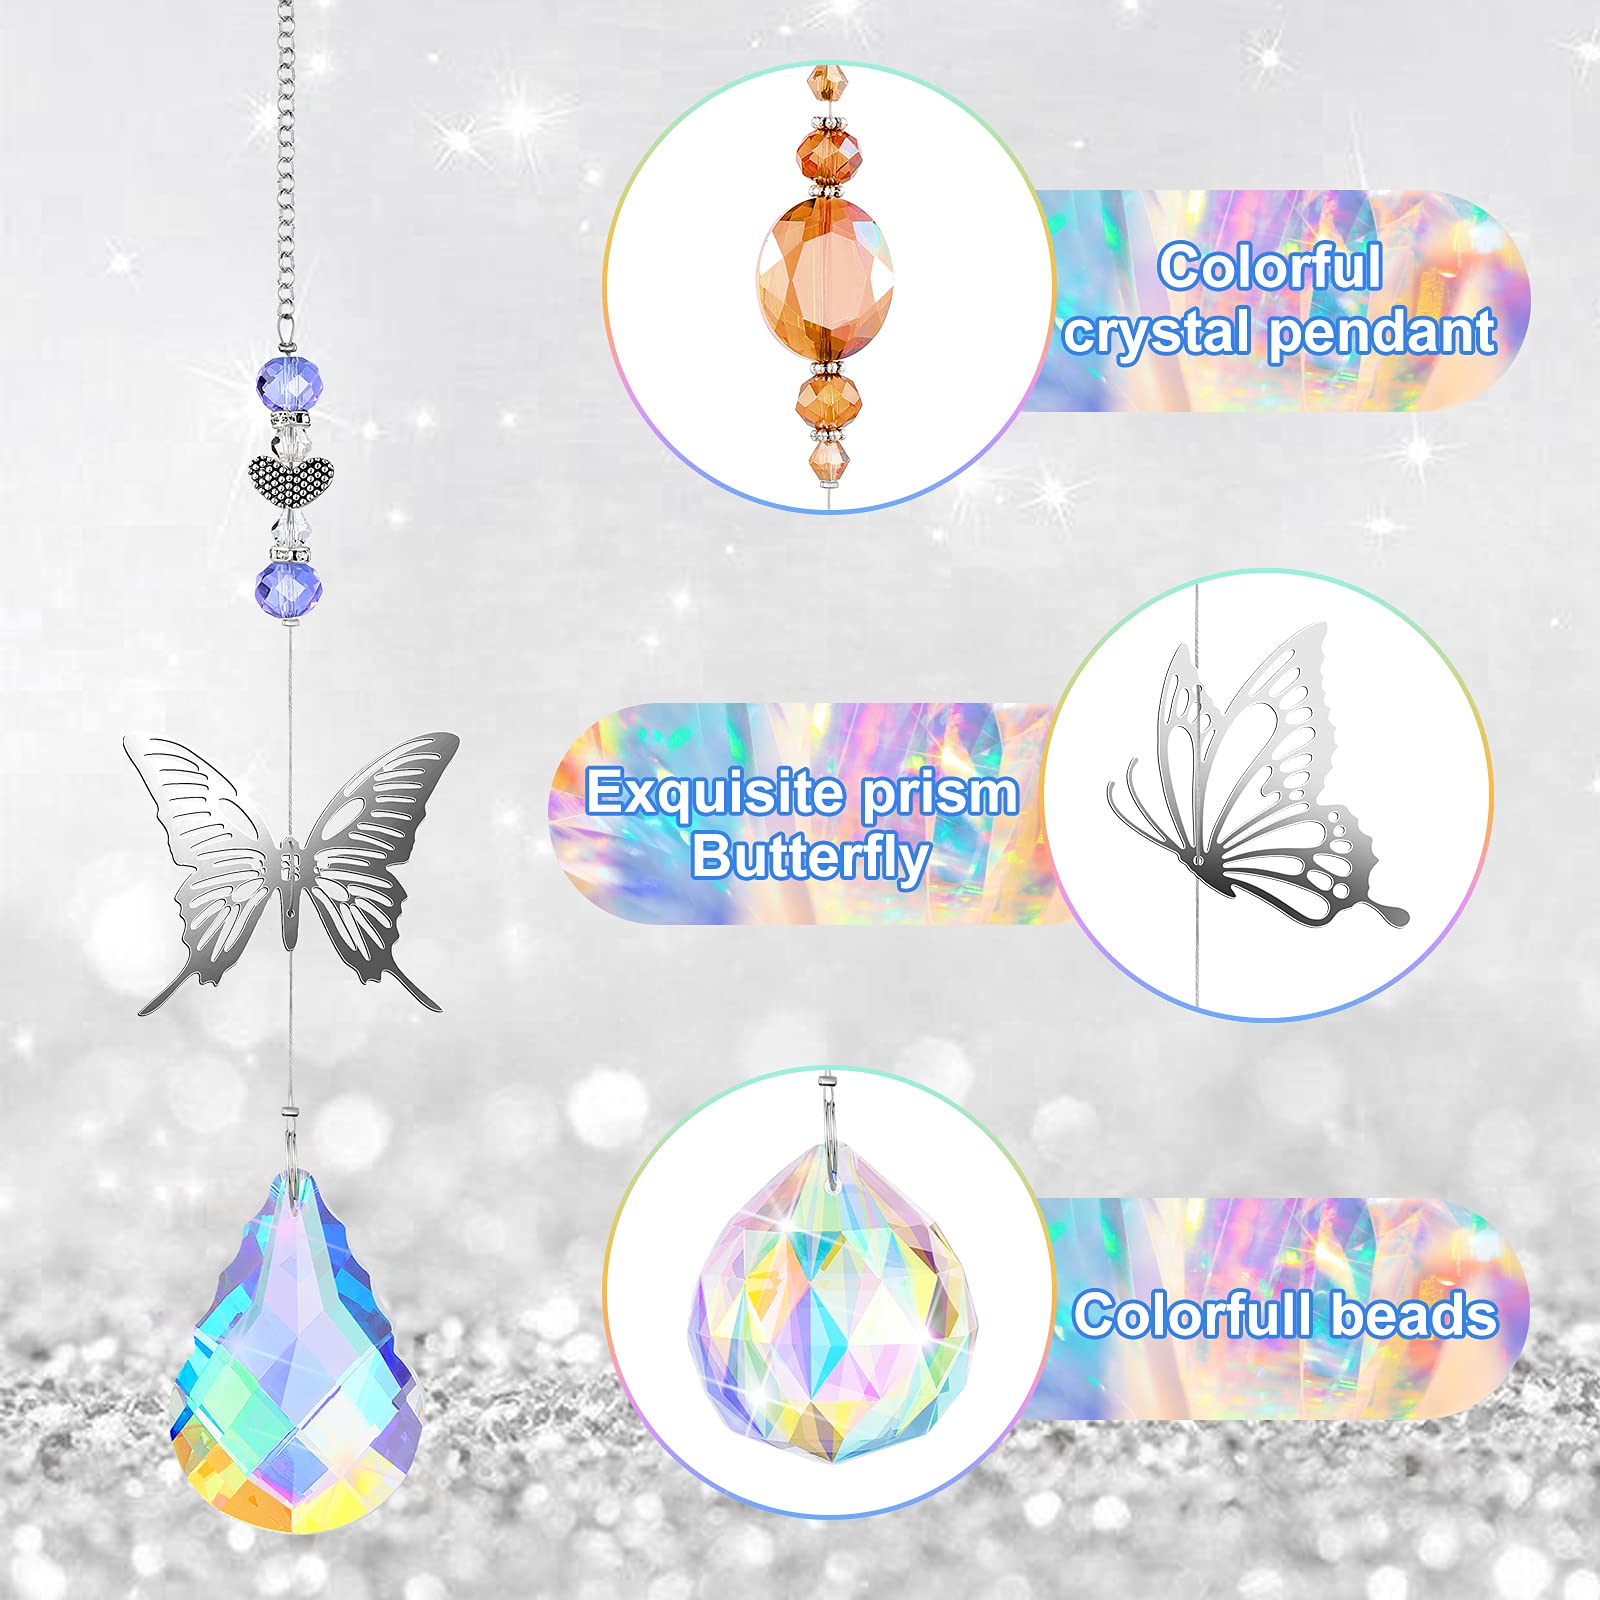 7 Pieces Crystals Suncatcher Butterfly Sun Catchers Colorful Crystal Chandelier Pendant Hummingbird Wall Hanging Tree Window Prism Ornament (Charming Colors, Butterfly Style)